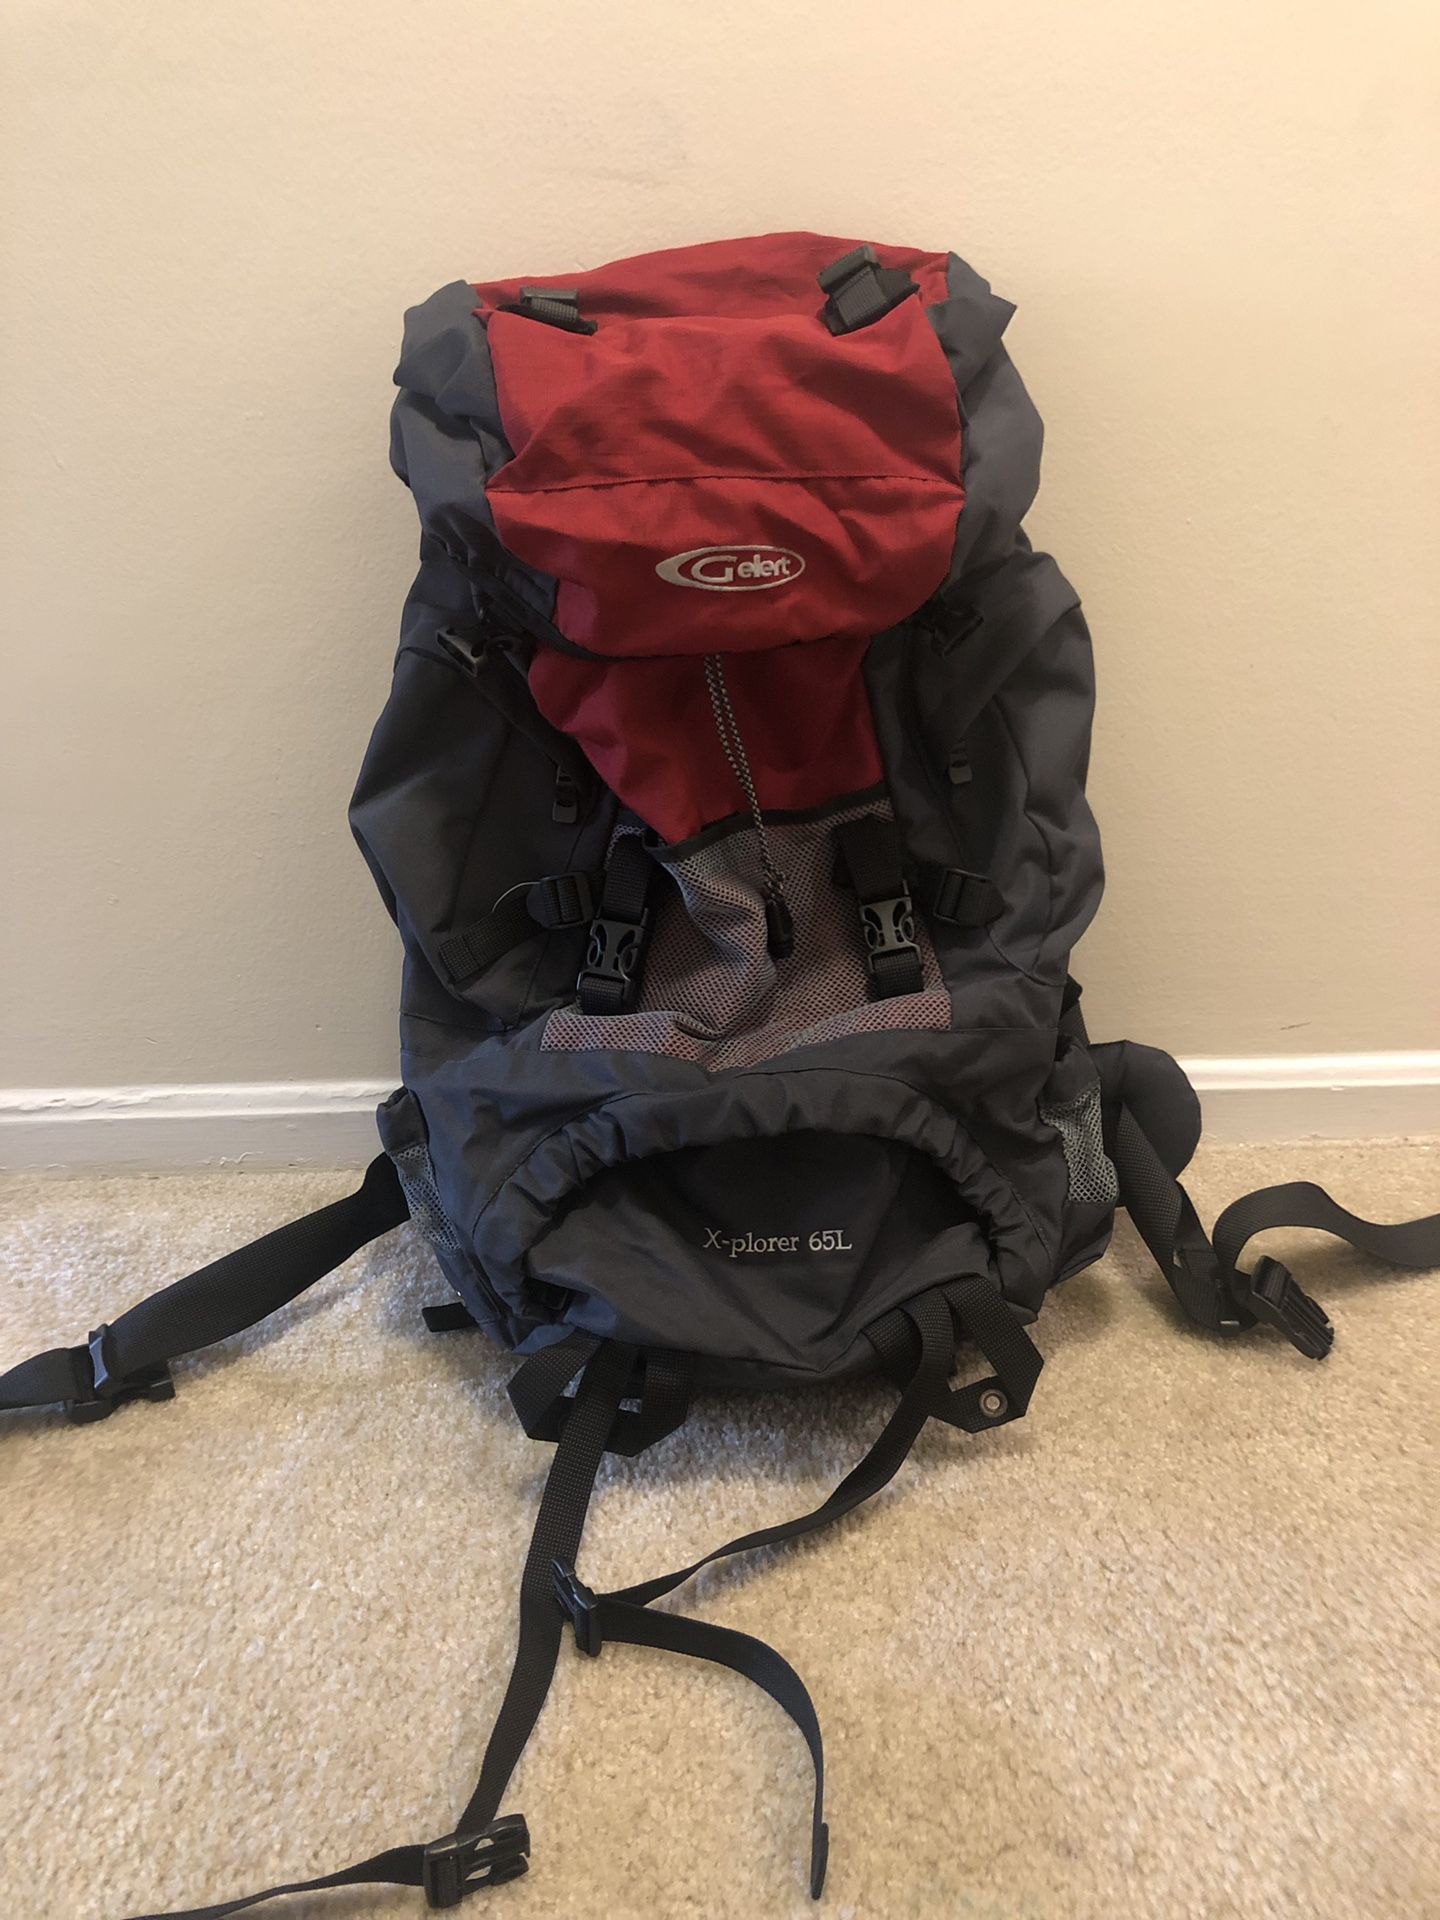 Backpack for Hiking, Camping, Backpacking